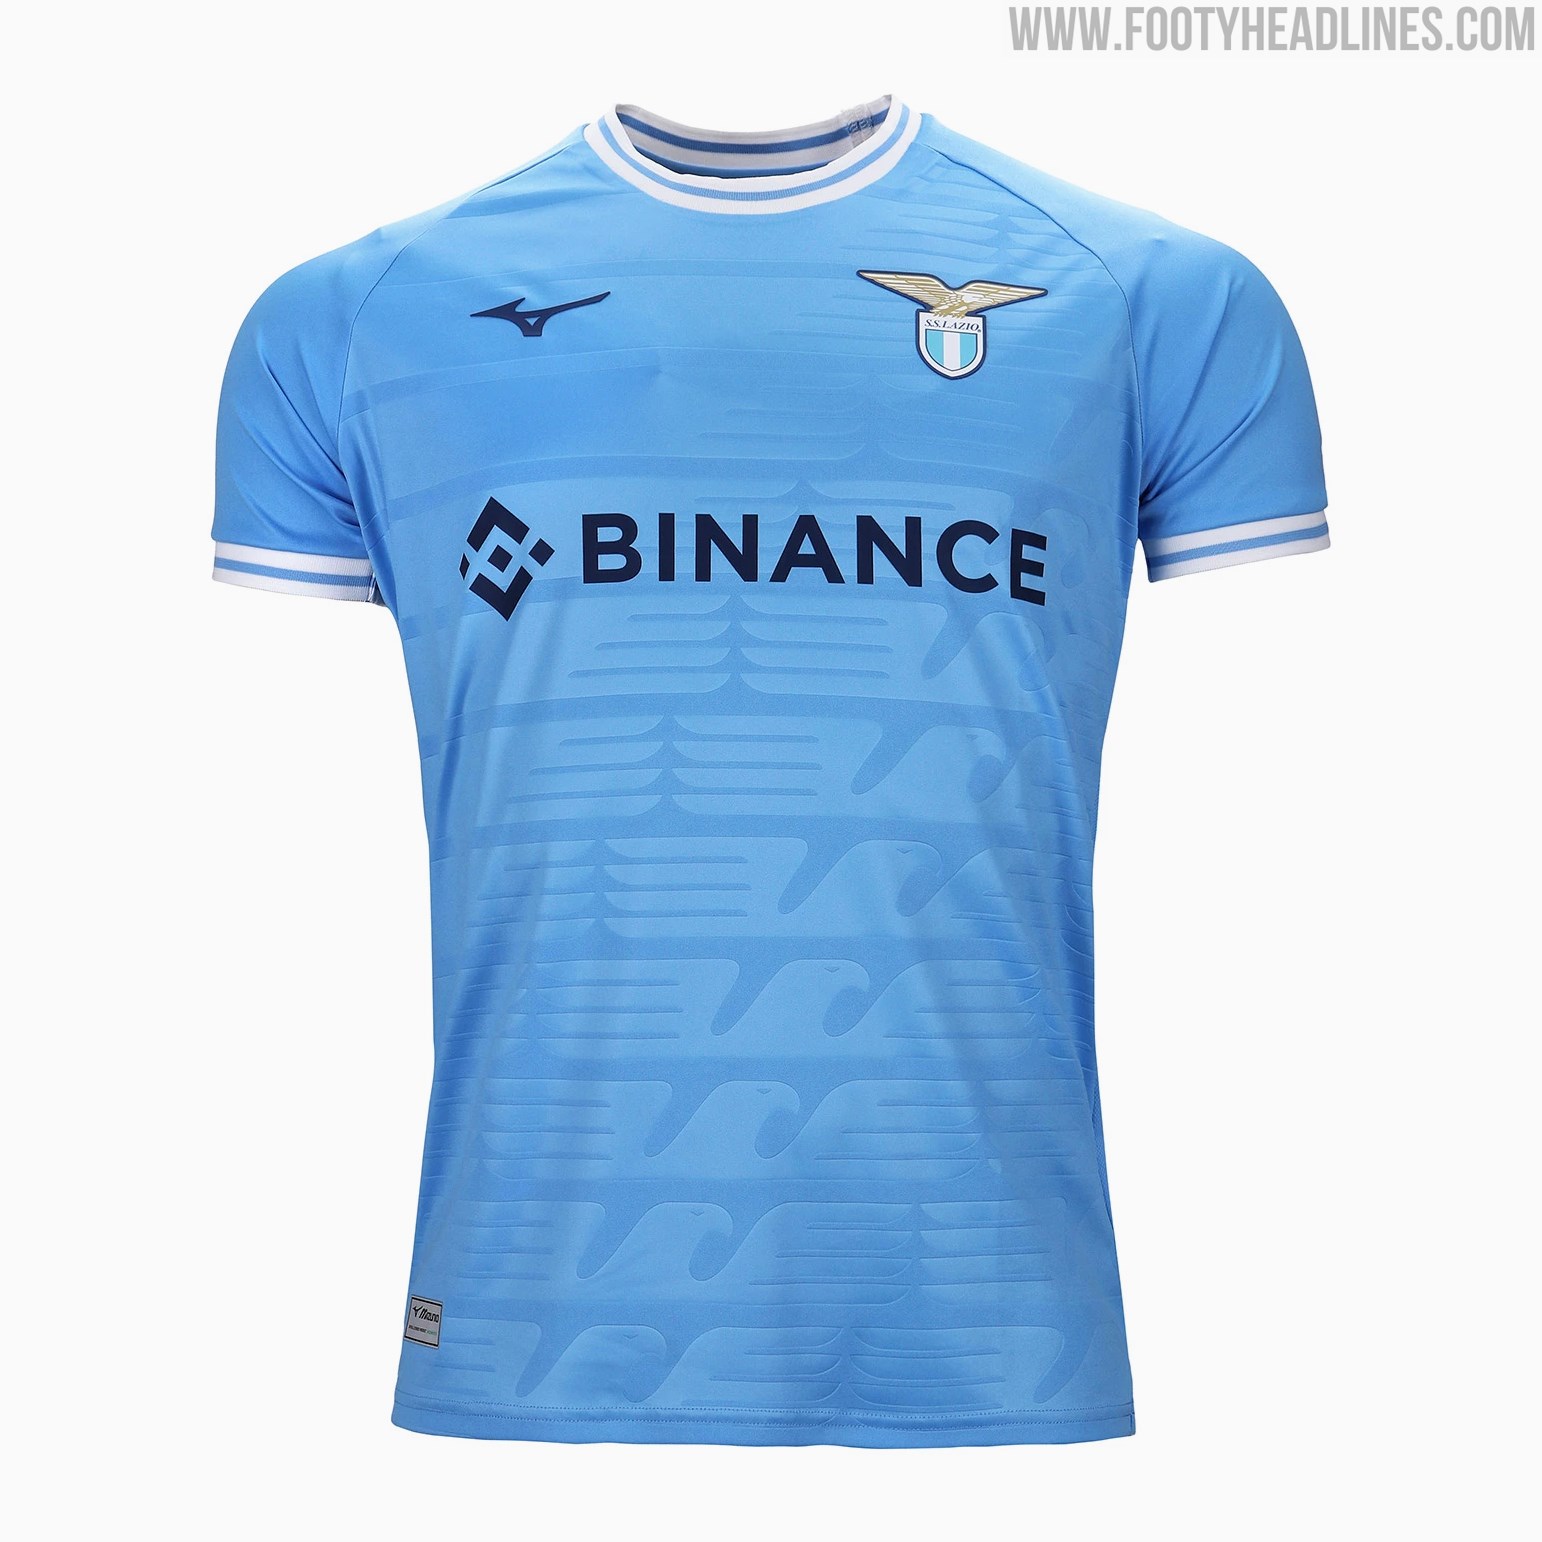 2021-22 Serie A Kit Overview - All Leaked & Released Kits - Footy Headlines